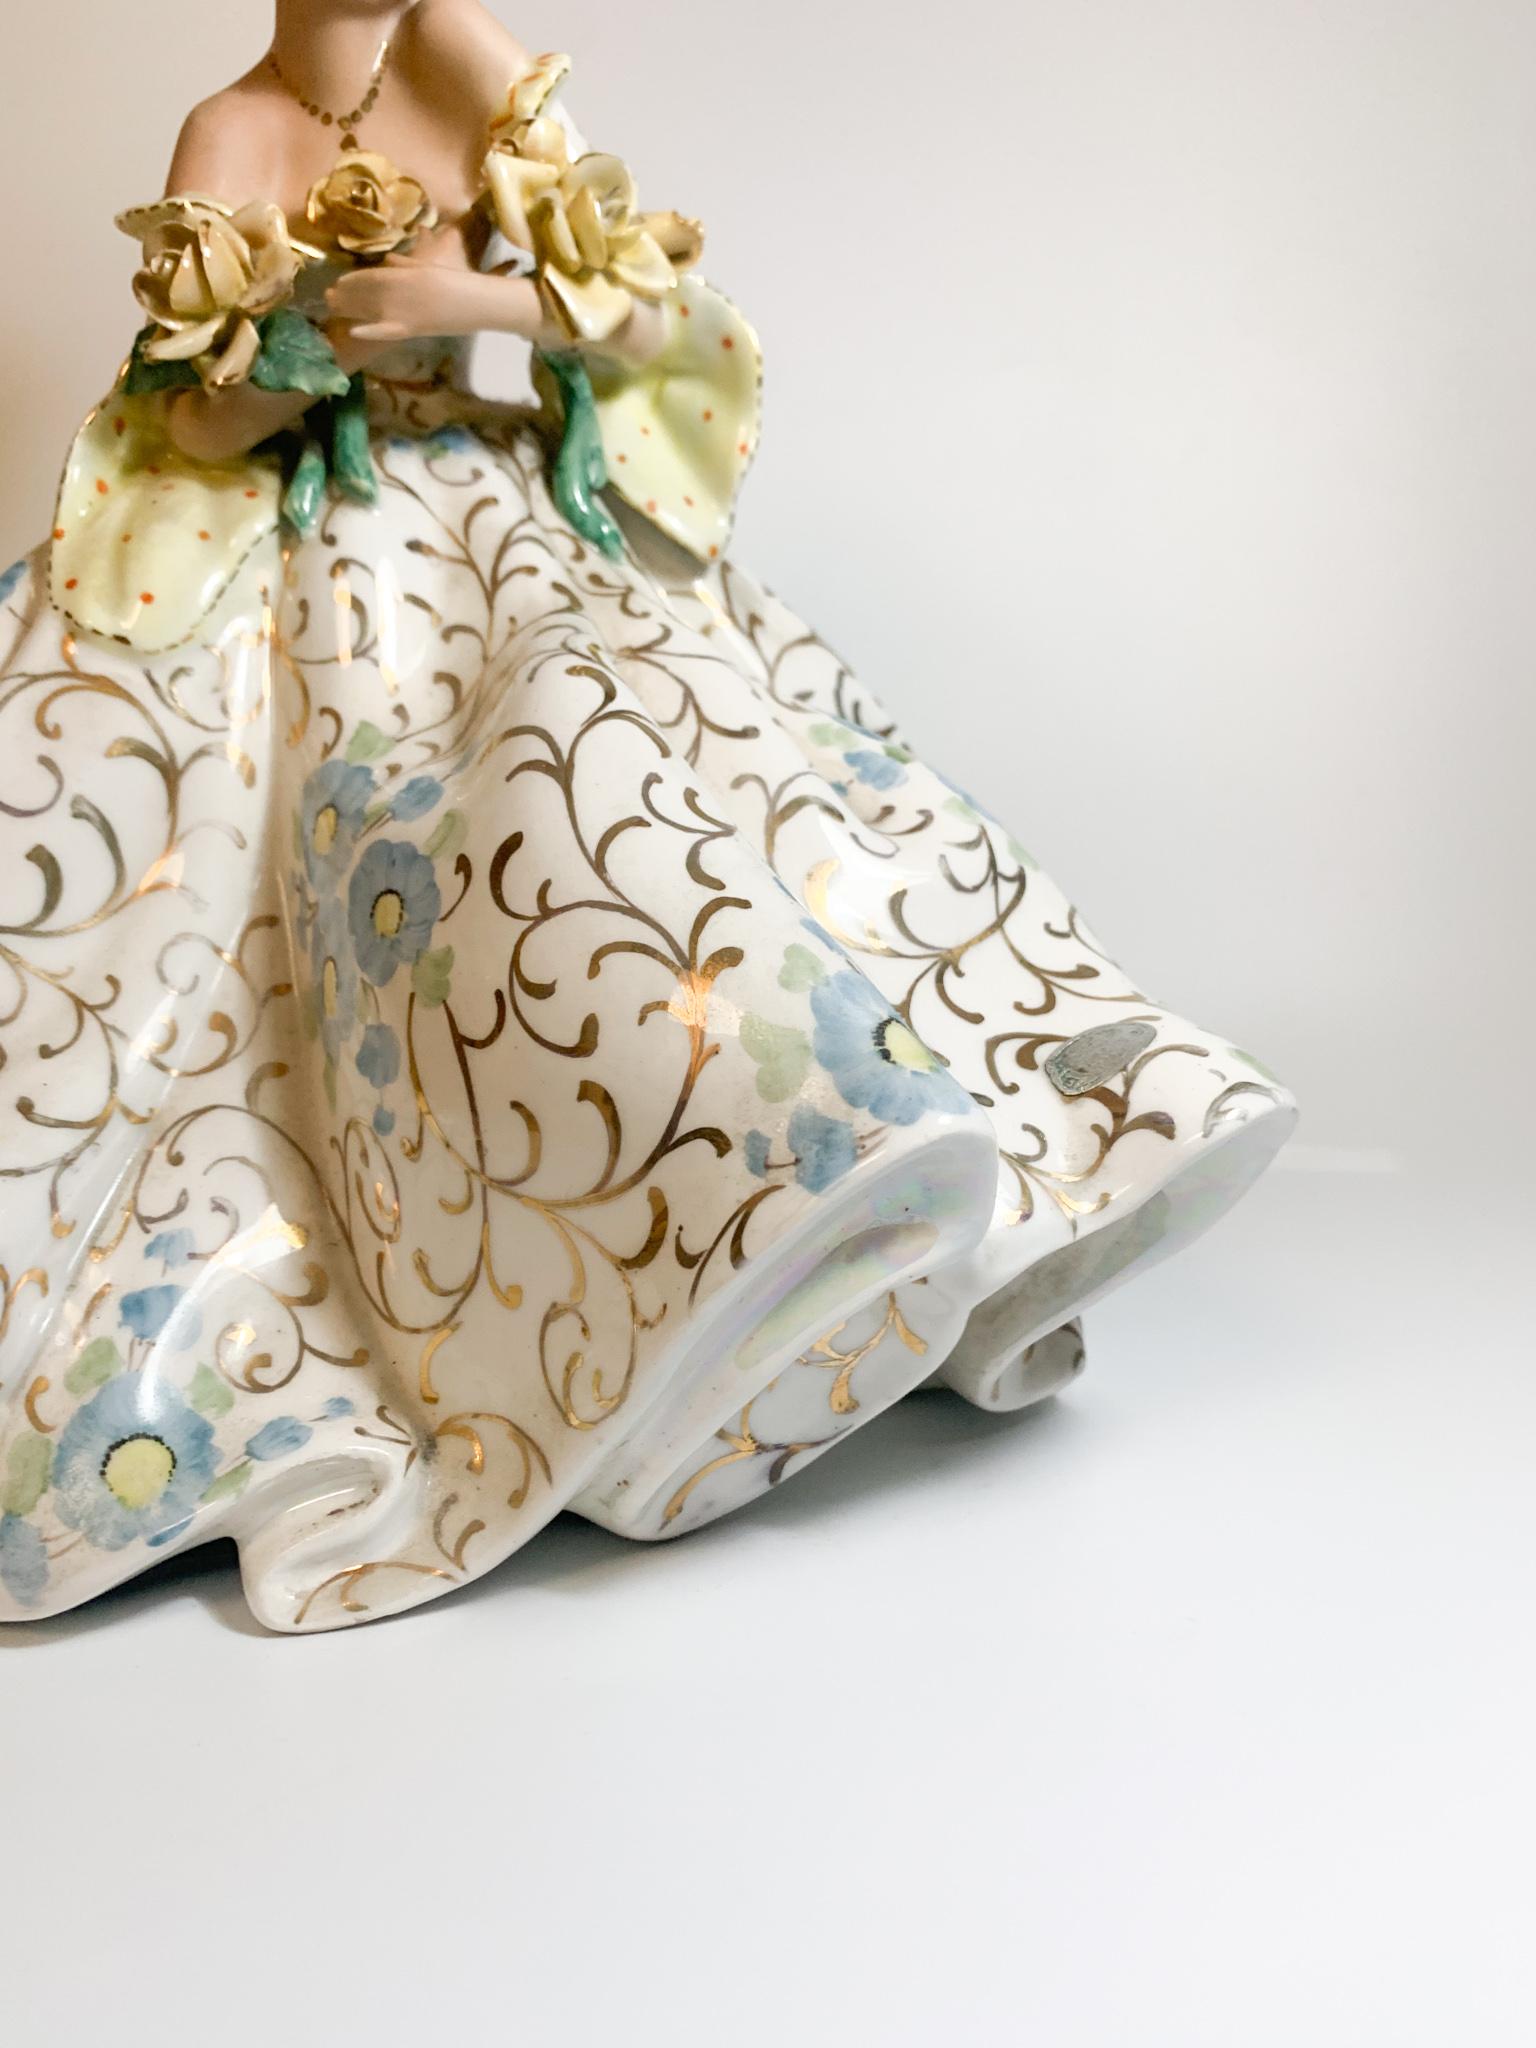 Italian Ceramic Statue of a Lady with Iridescent Details by Tiziano Galli from the 1950s For Sale